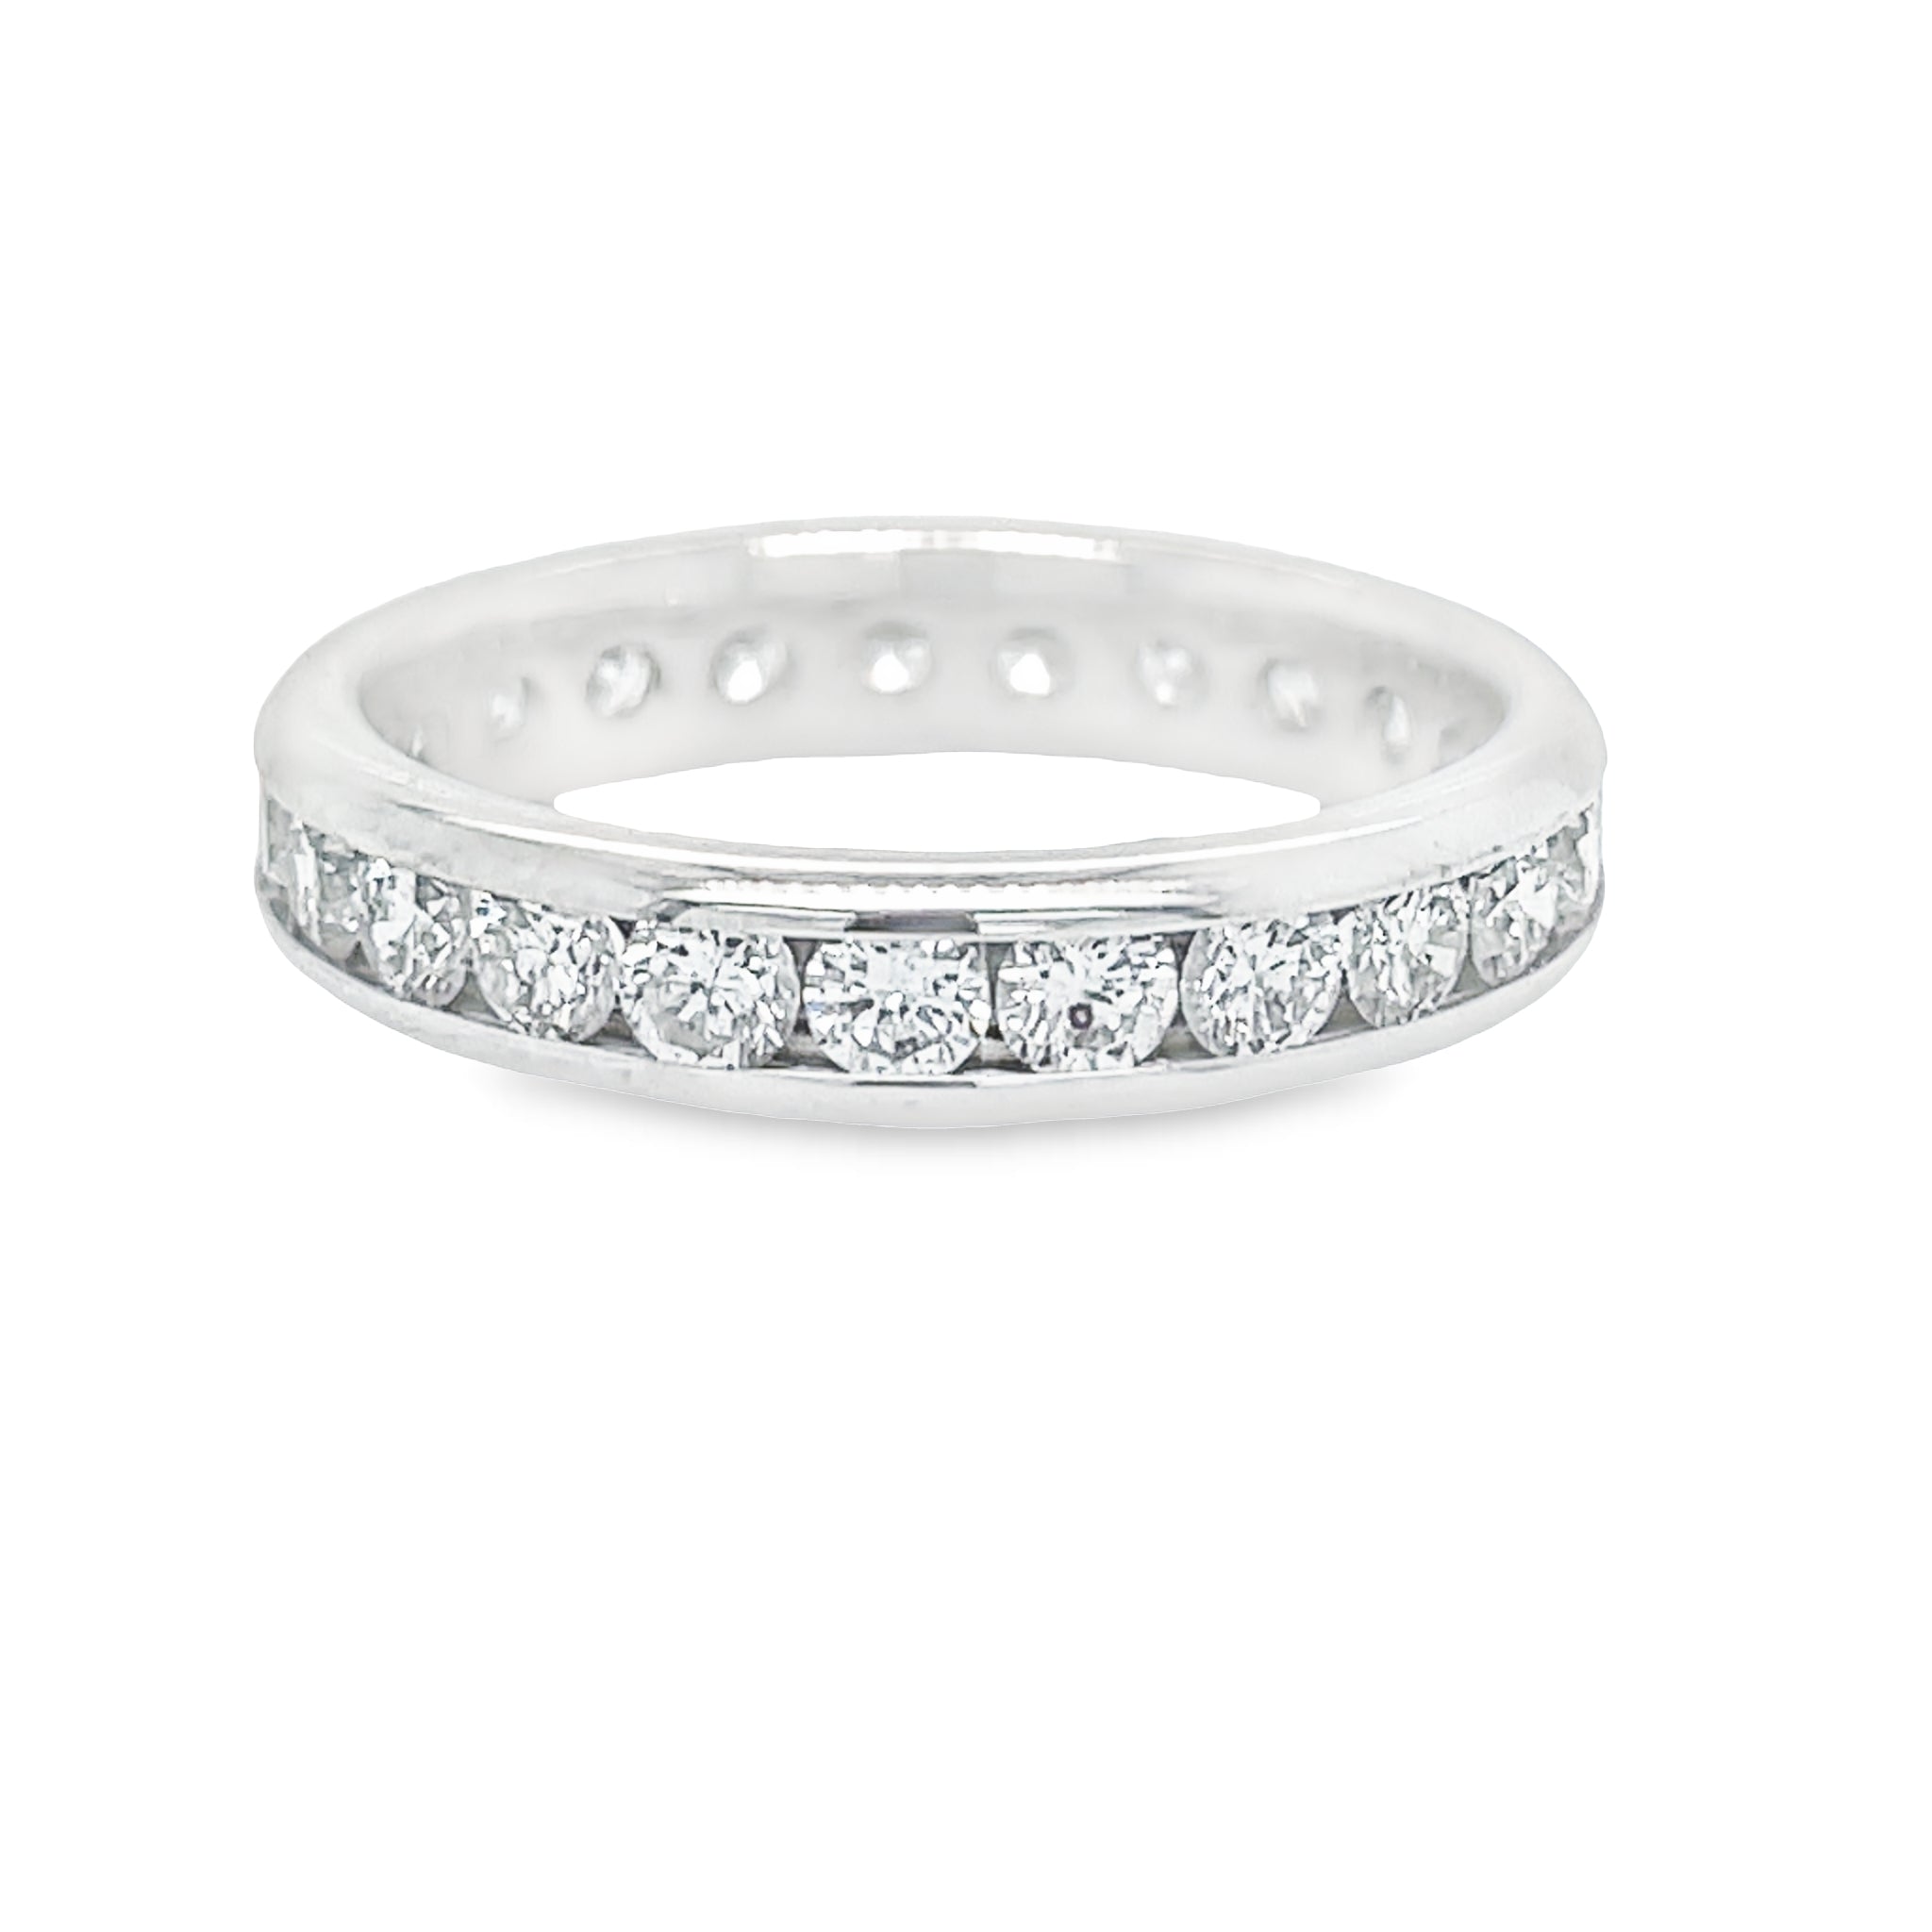 Created from 14k white gold and embedded with 1.50cts round diamonds, the Eternity Channel Setting Diamond Ring is an effortless blend of timeless elegance and modern charm. The carefully crafted setting accentuates the diamonds, making them shine brighter than ever before